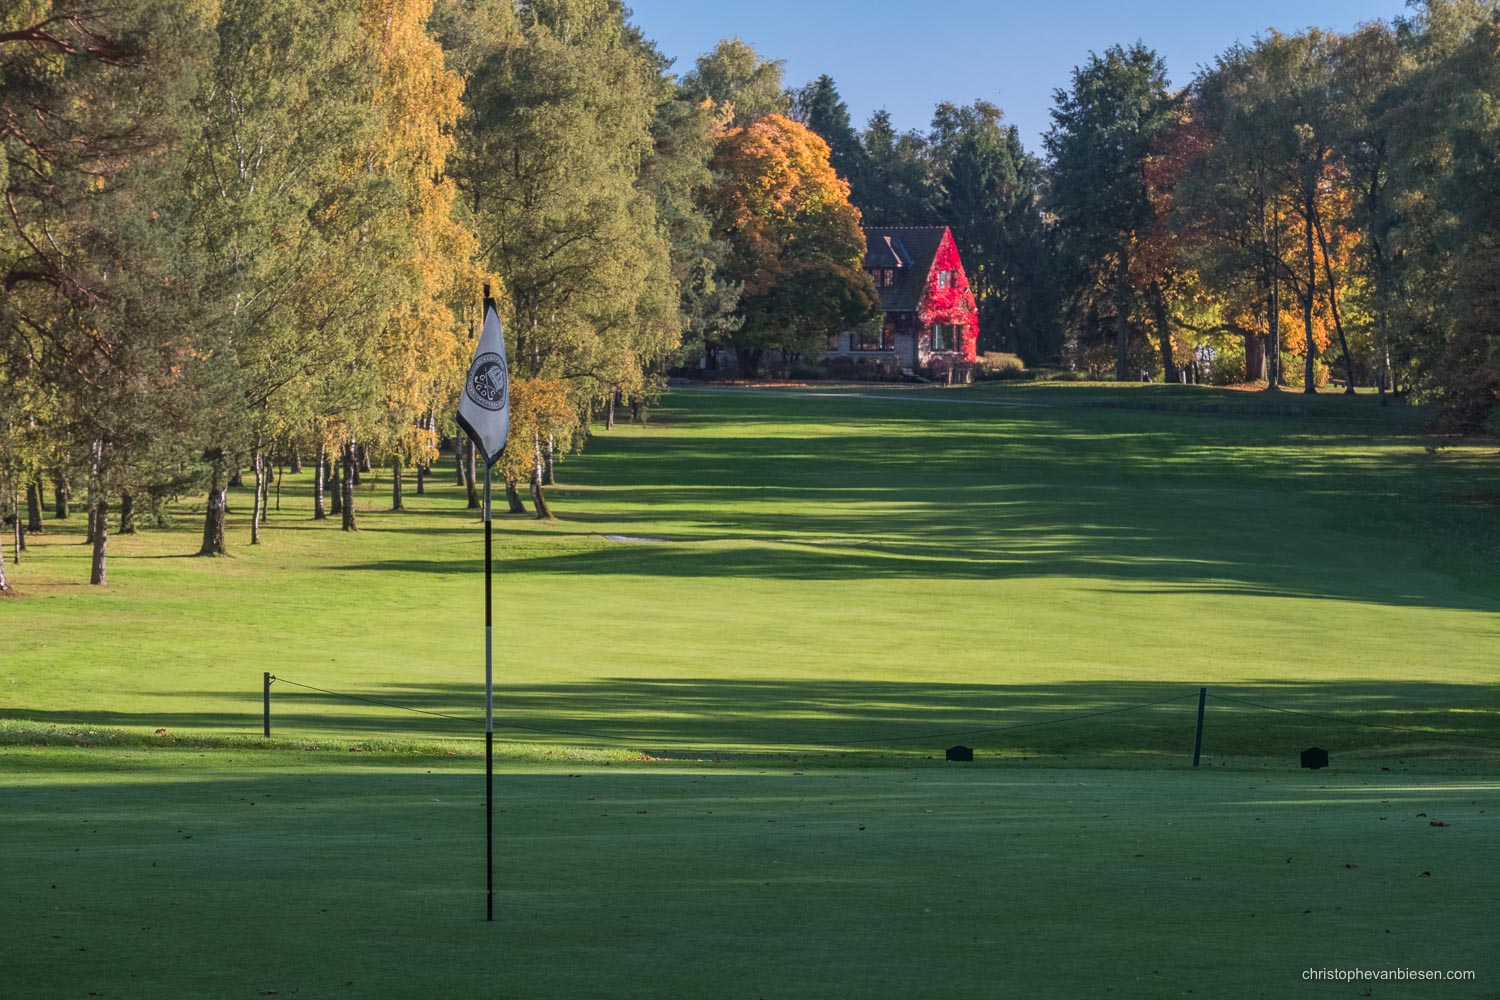 Work with me - Commission Work - Golf Club Grand Ducal Luxembourg Senningerberg - Hole 1 - Photography by Christophe Van Biesen - Luxembourg Landscape and Travel Photographer